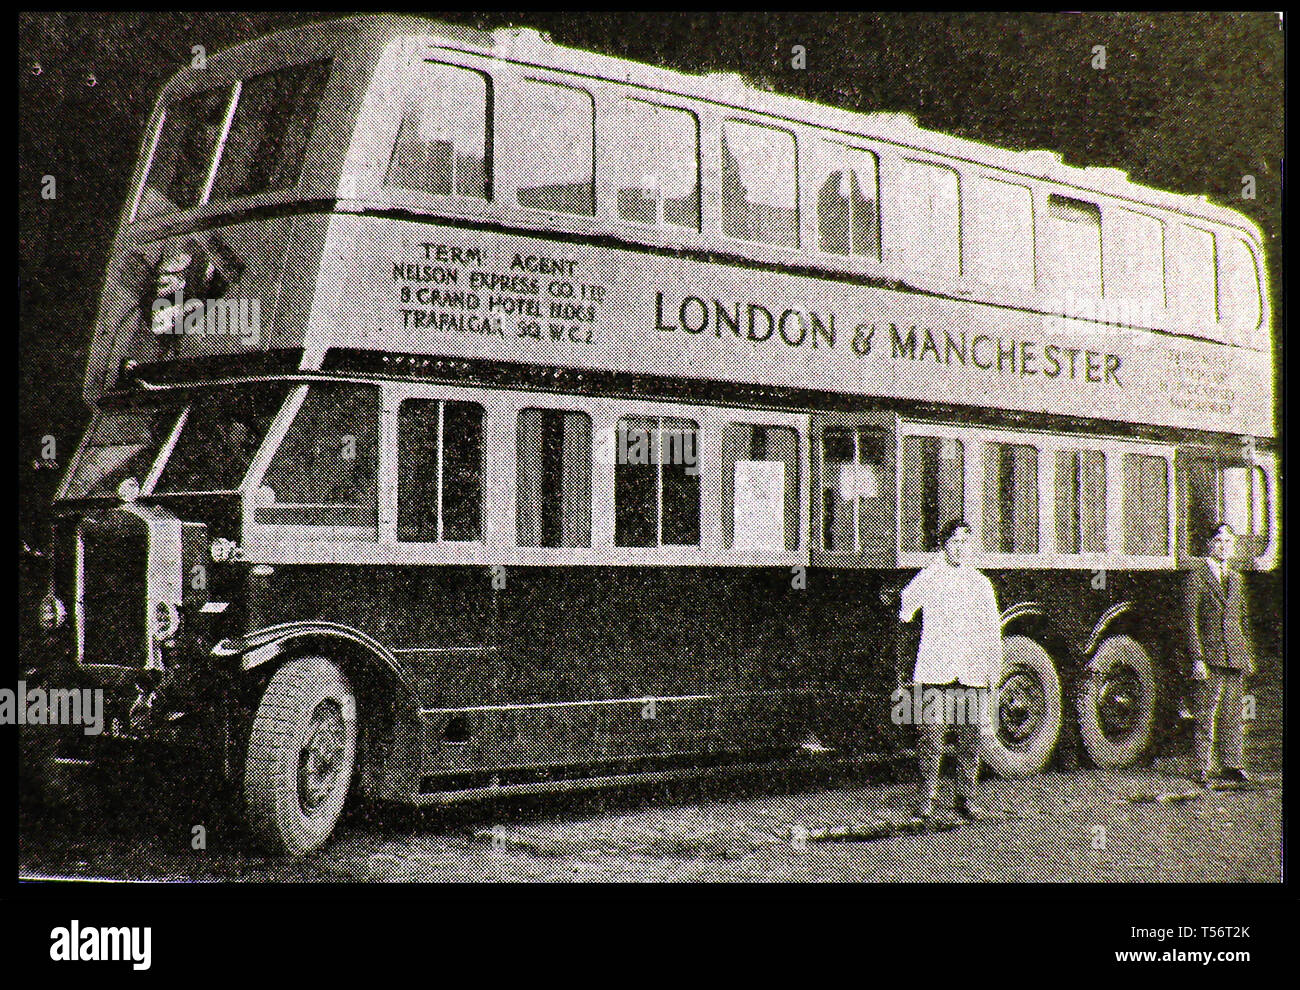 GUY FCX Sleeper coach service - A 1930's illustration showing a six wheeled long distance English double decker bus  (with driver and conductor) travelling from London to Manchester, displaying 'Agent - Nelson Express Company Ltd, 8 Grand Hotel Buildings, Trafalgar Square, London' . It was built on a Strachan's body and was 13 feet, nine inches high and was fitted with both two and four-berth cabins, a kitchen and an attendant's compartment Stock Photo